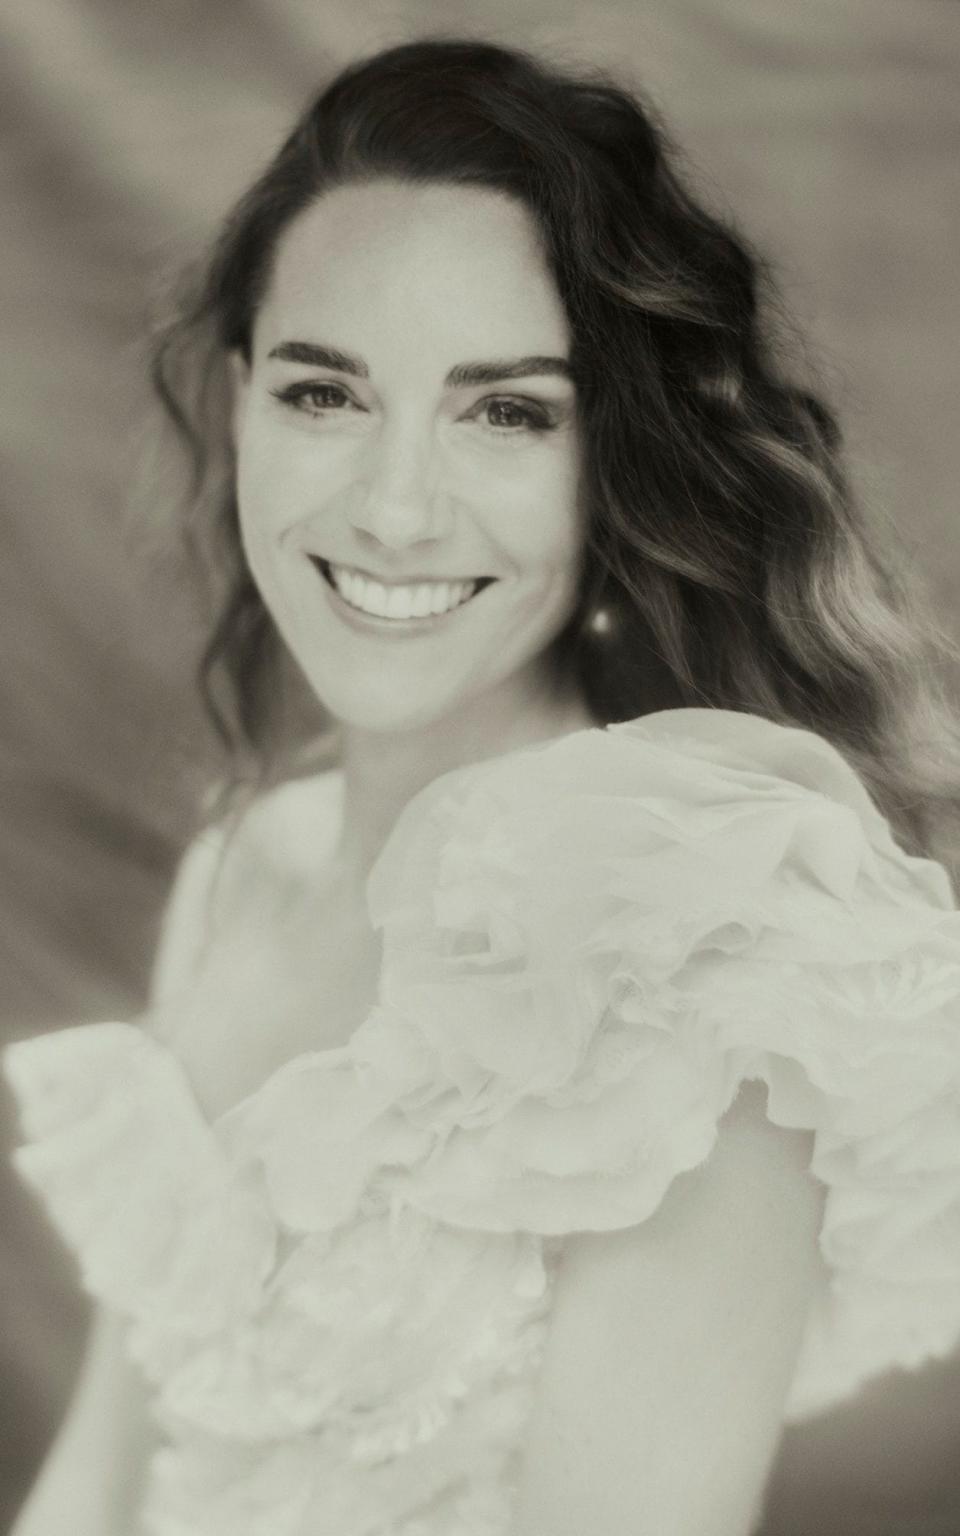 Another photograph captures Kate beaming into the camera, echoing Diana, Princess of Wales - Paolo Roversi